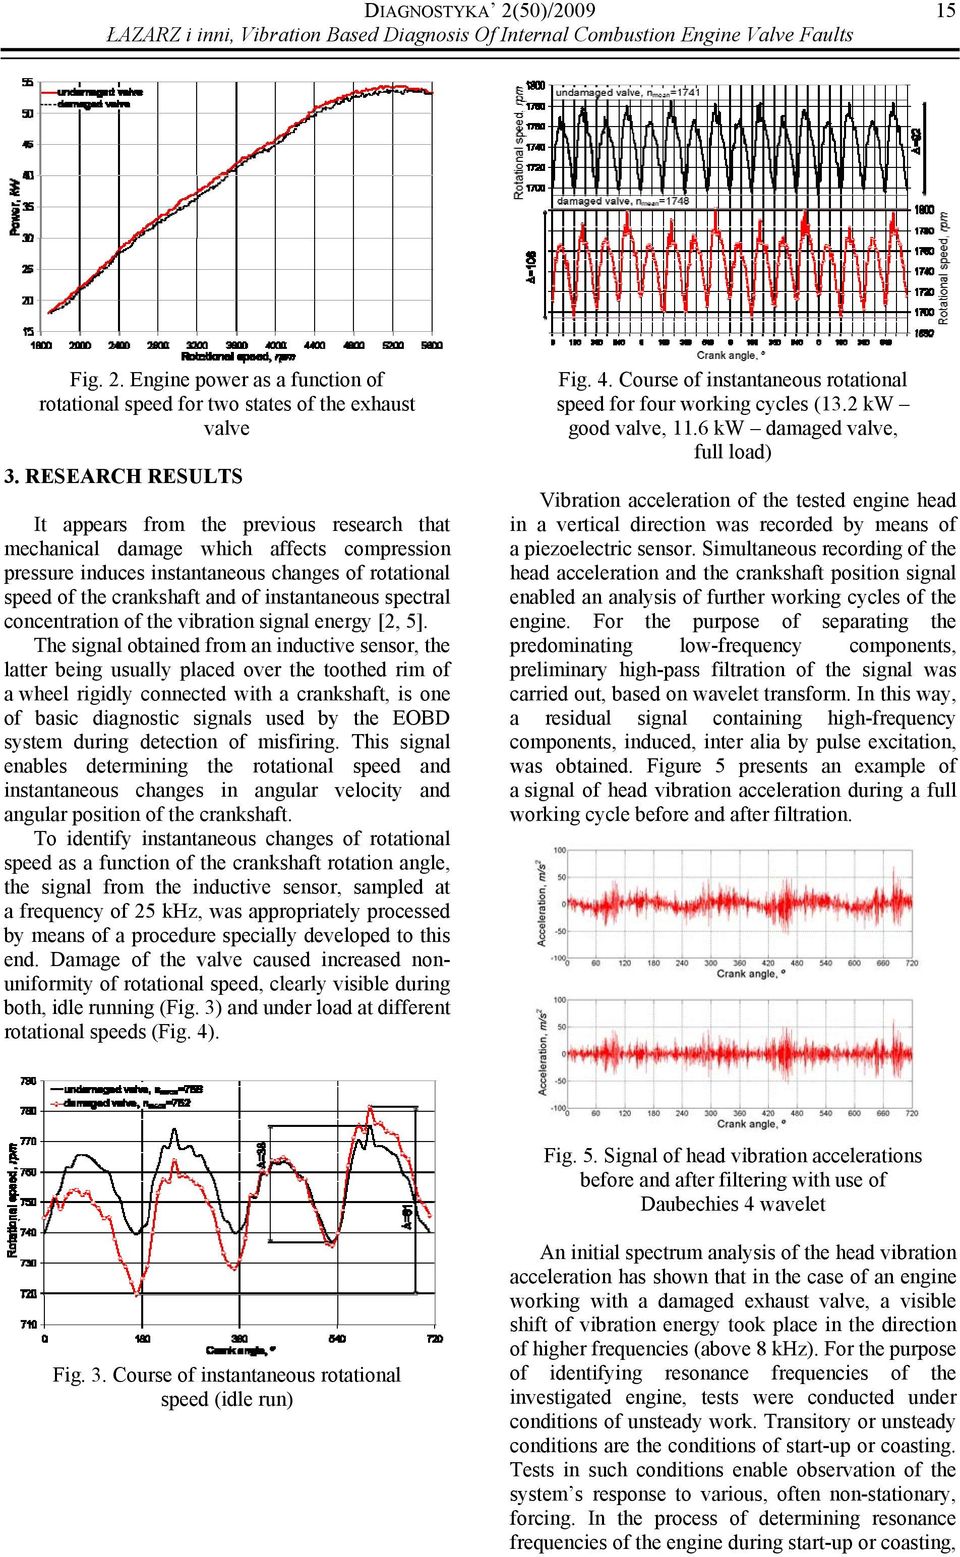 instantaneous spectral concentration of the vibration signal energy [2, 5].